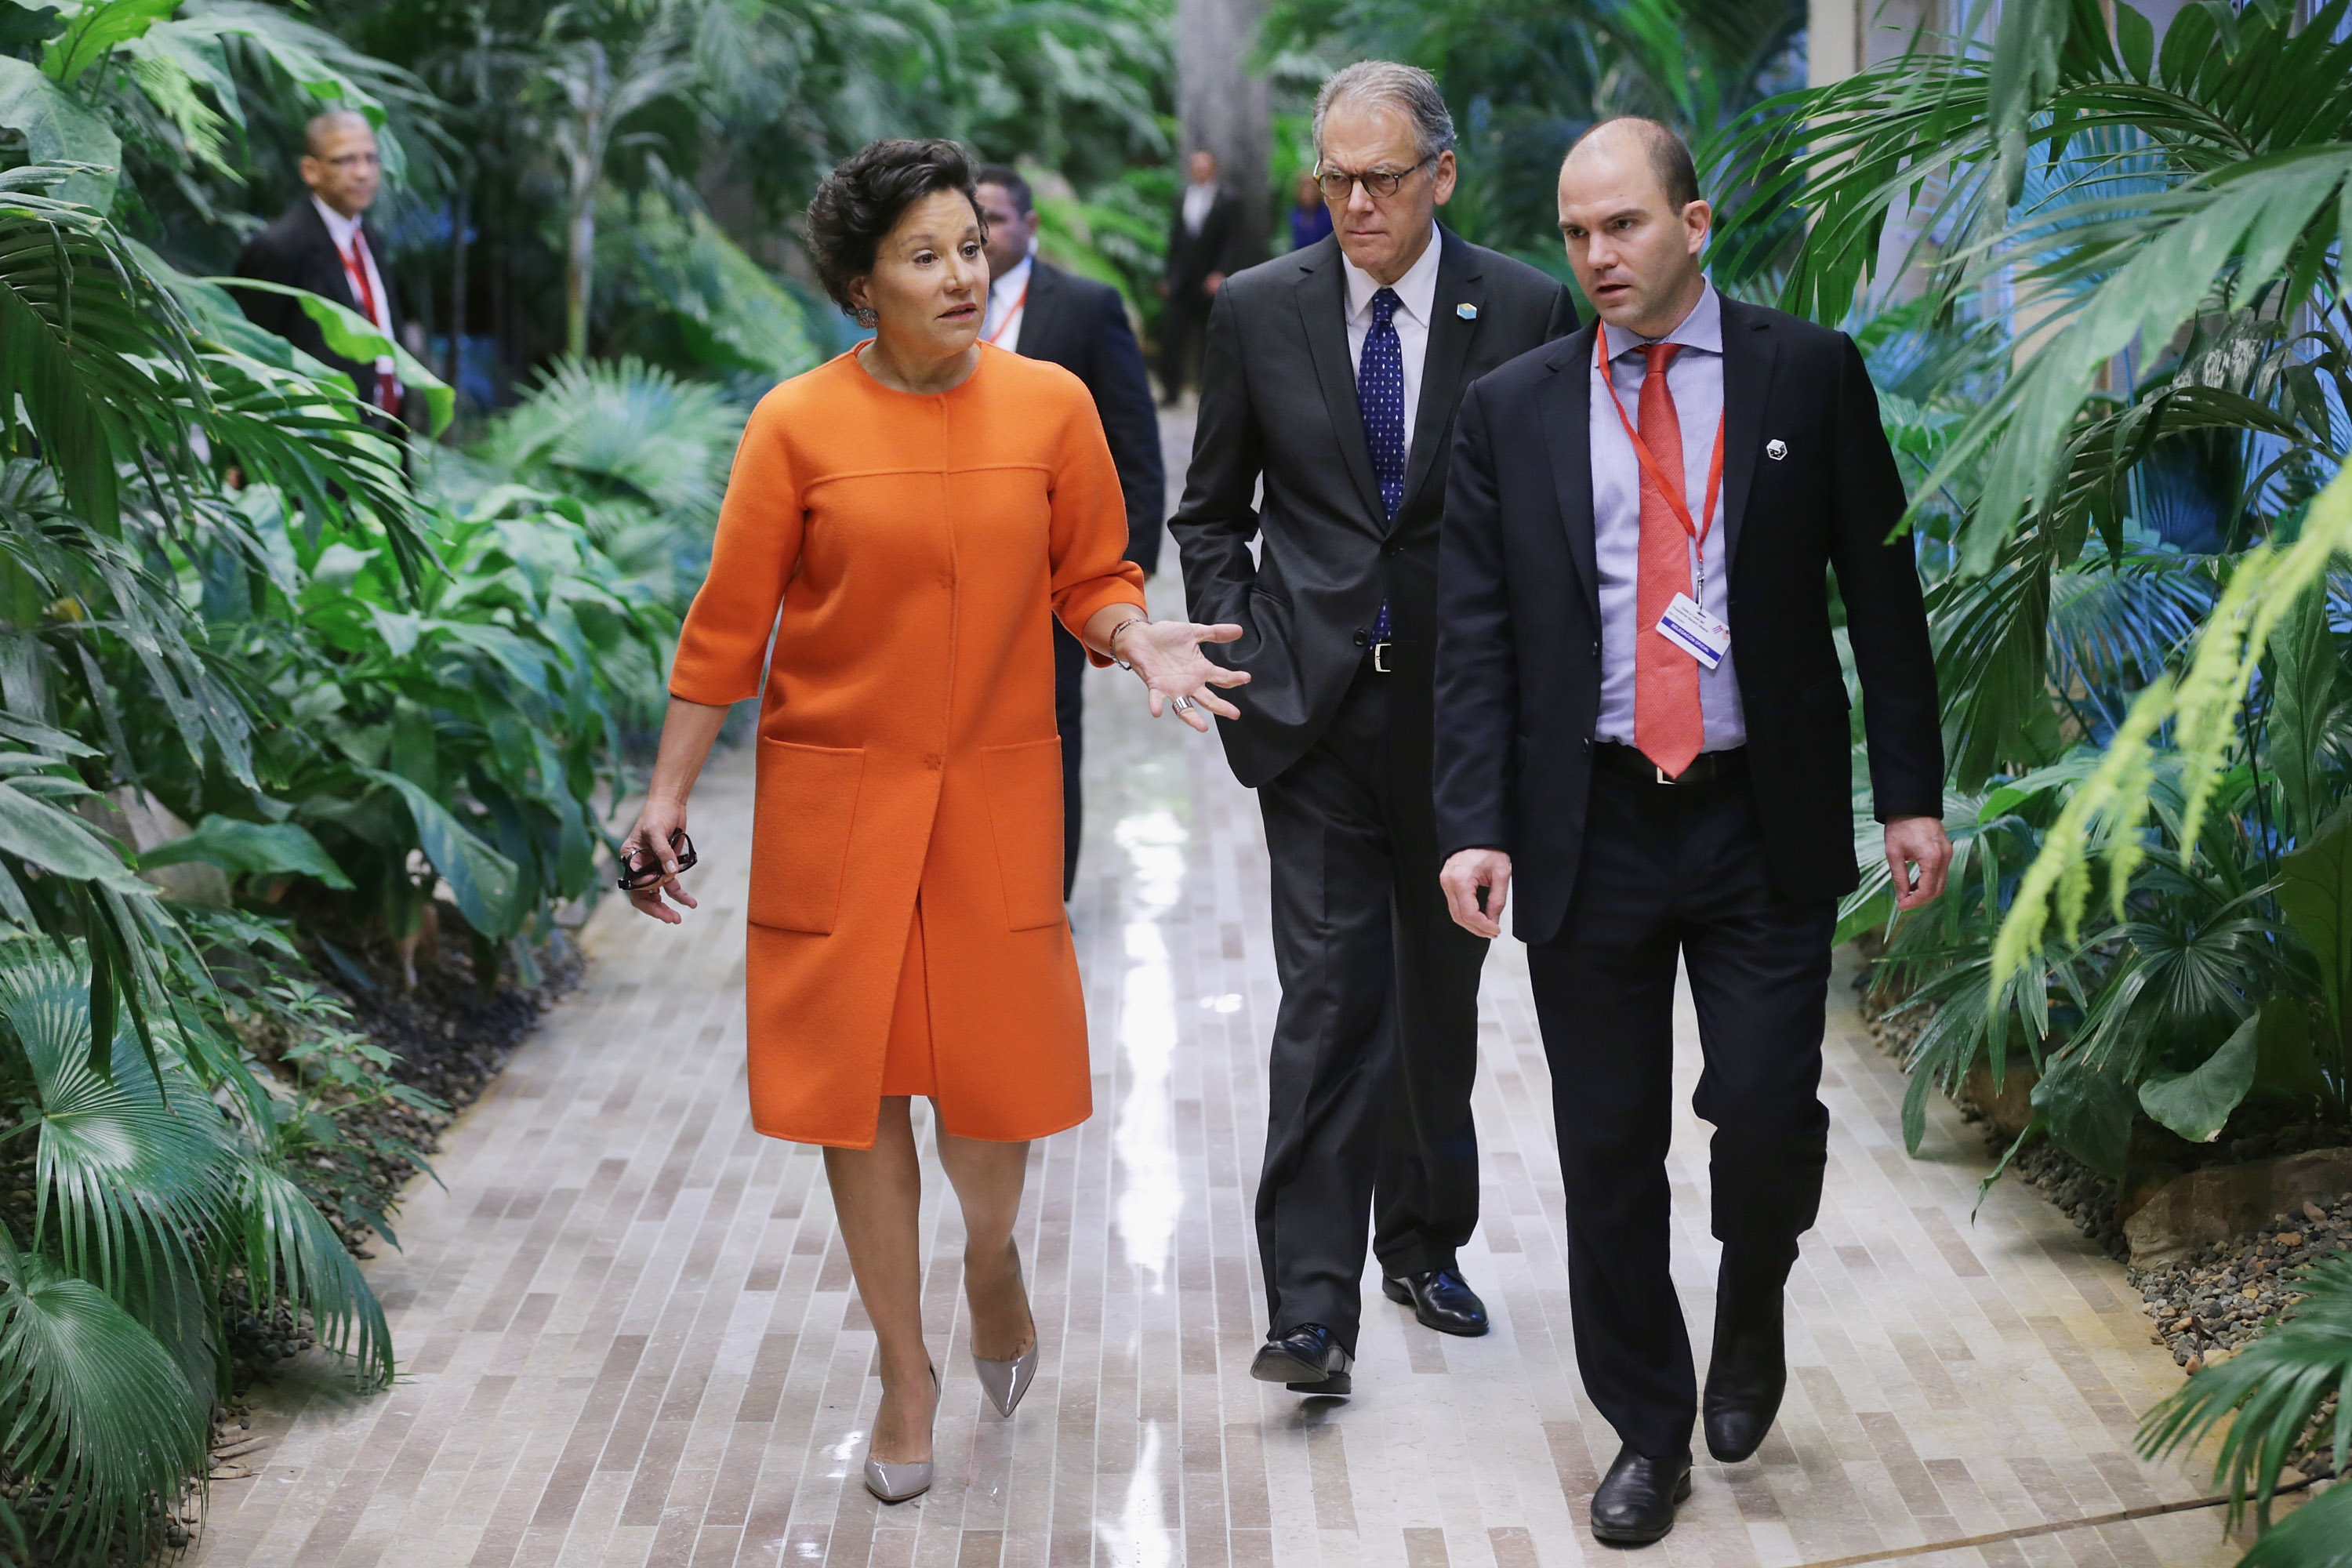 (L-R) U.S. Commerce Secretary Penny Pritzker, U.S. Chief of Mission to the U.S. Embassy in Cuba Jeffrey DeLaurentis and White House Deputy National Security Advisor Ben Rhodes arrive for talks at the Palace of the Revolution March 21, 2016 in Havana, Cuba. The first sitting U.S. president to visit Cuba in 88 years, Barack Obama and Castro will sit down for bilateral talks and will deliver joint statements to the news media before a state dinner Monday night. 